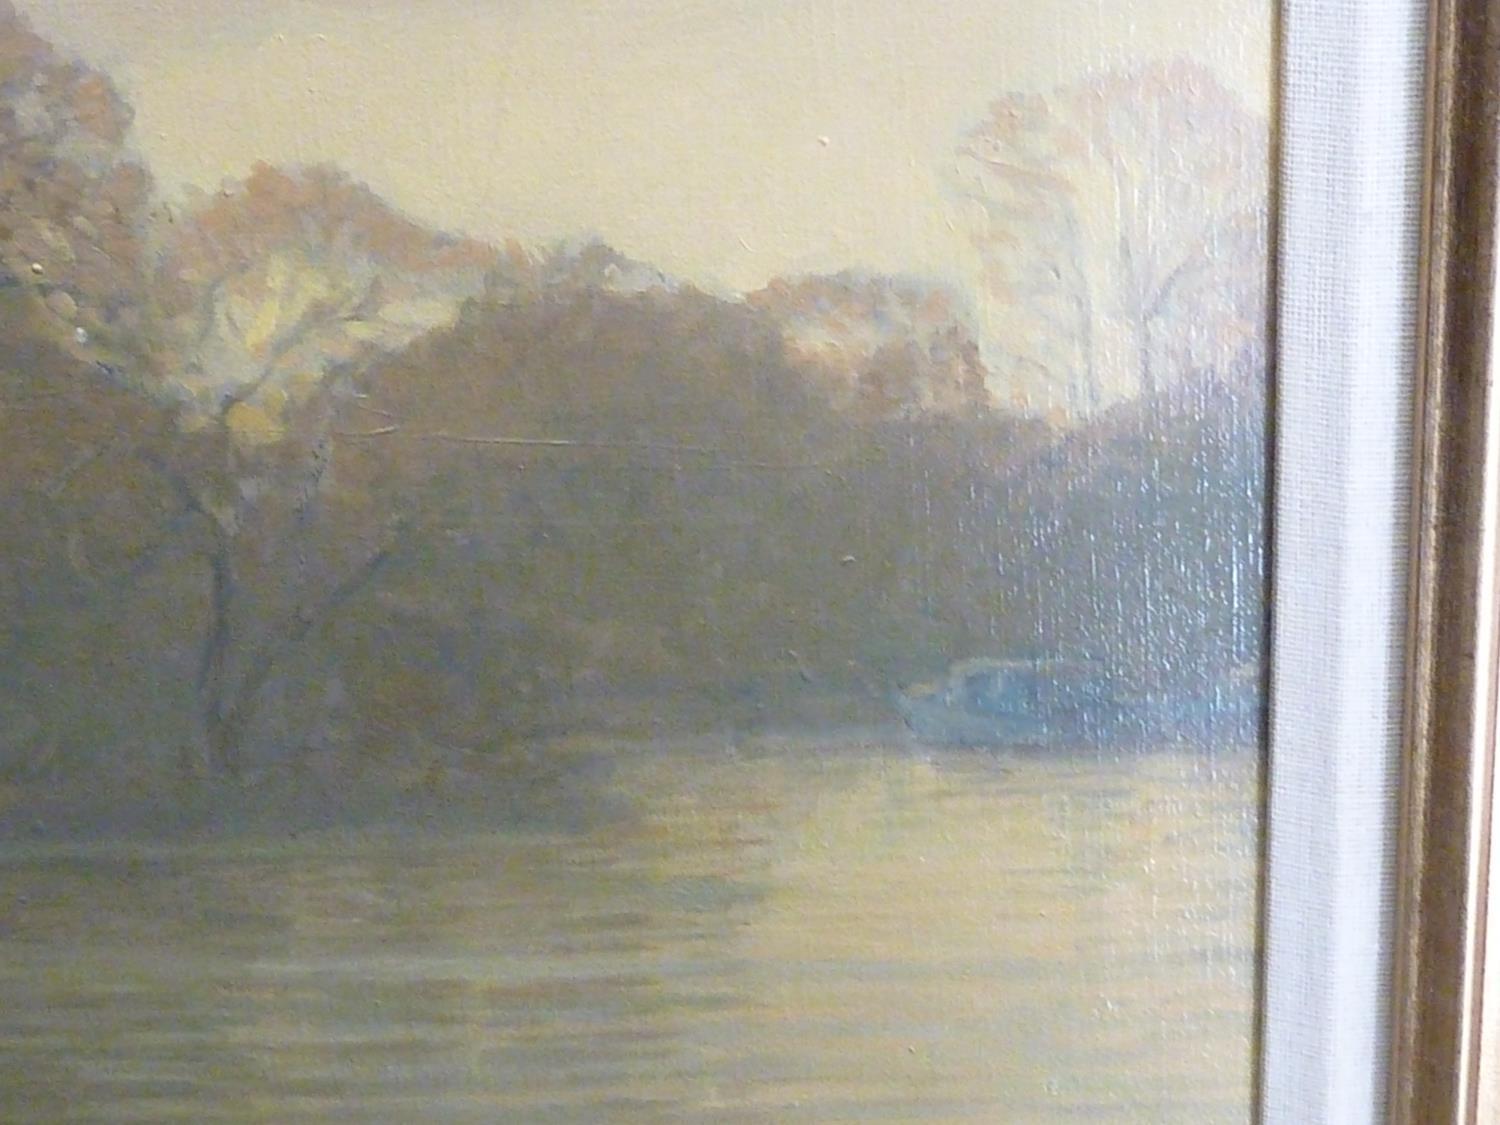 Noel Shepherdson - River with island and pleasure boats, possibly Church Island, Thames , oil on